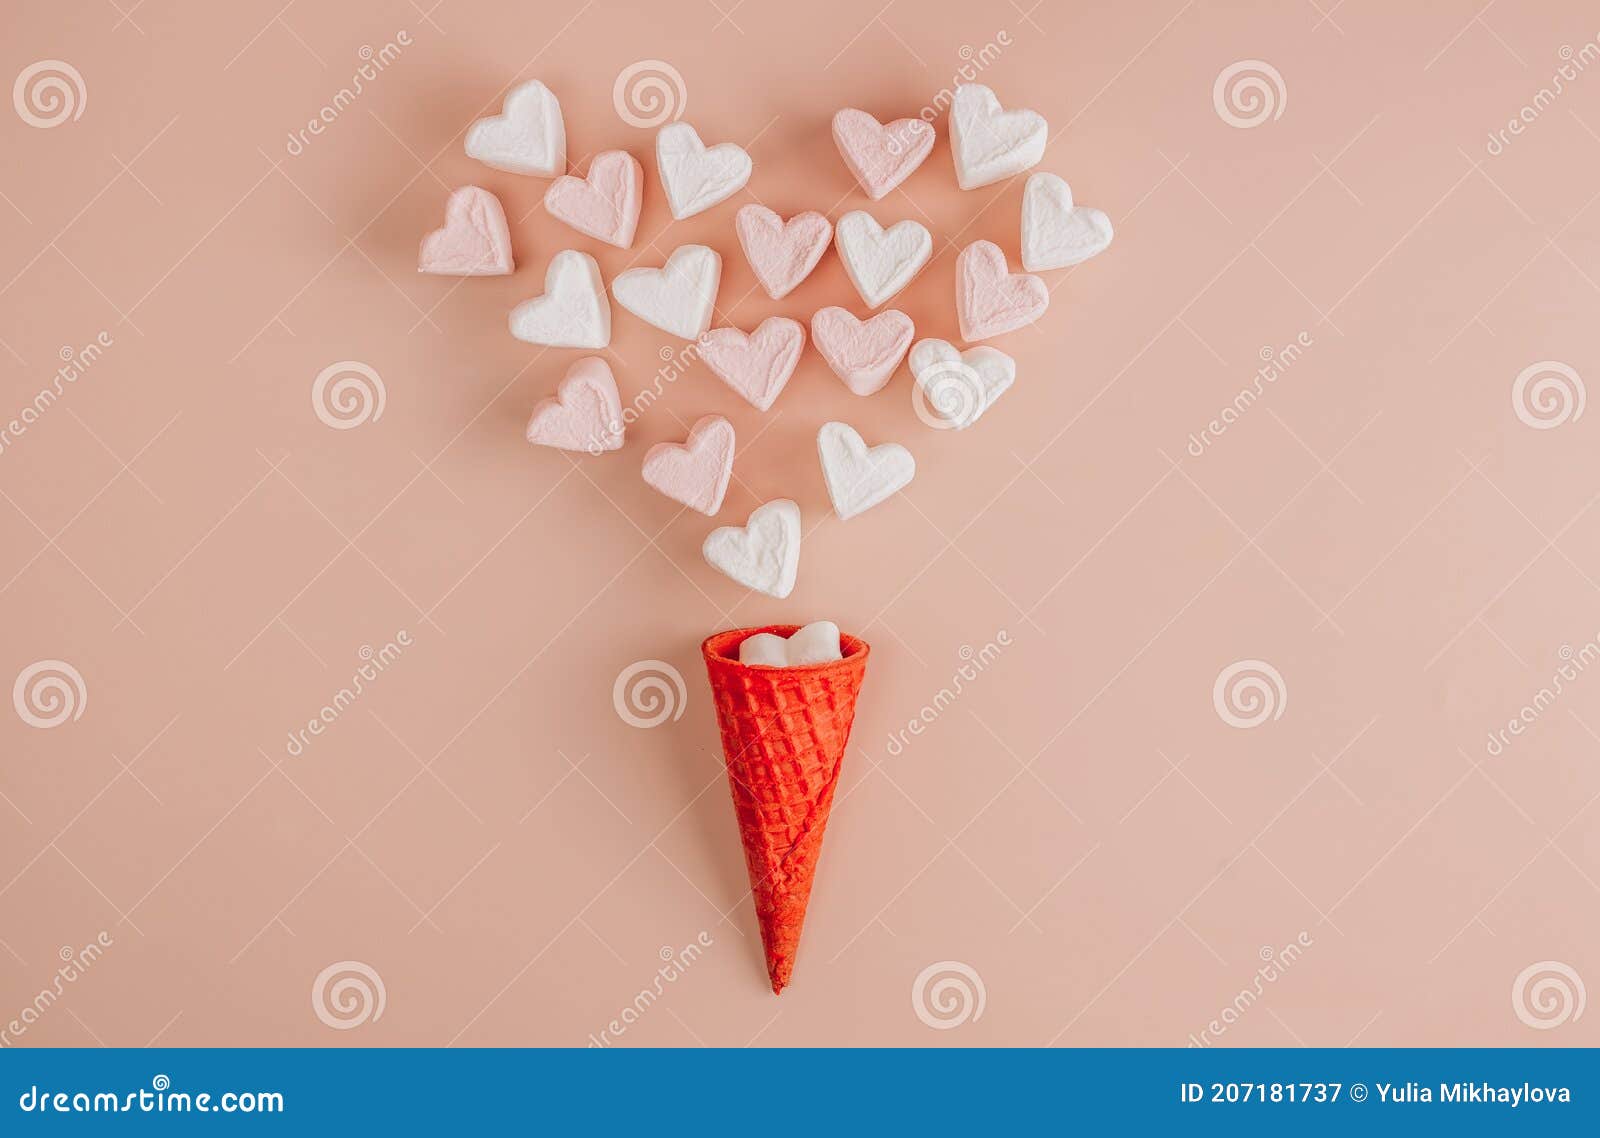 Waffle cone with heart-shaped marshmallows, close-up on a blue